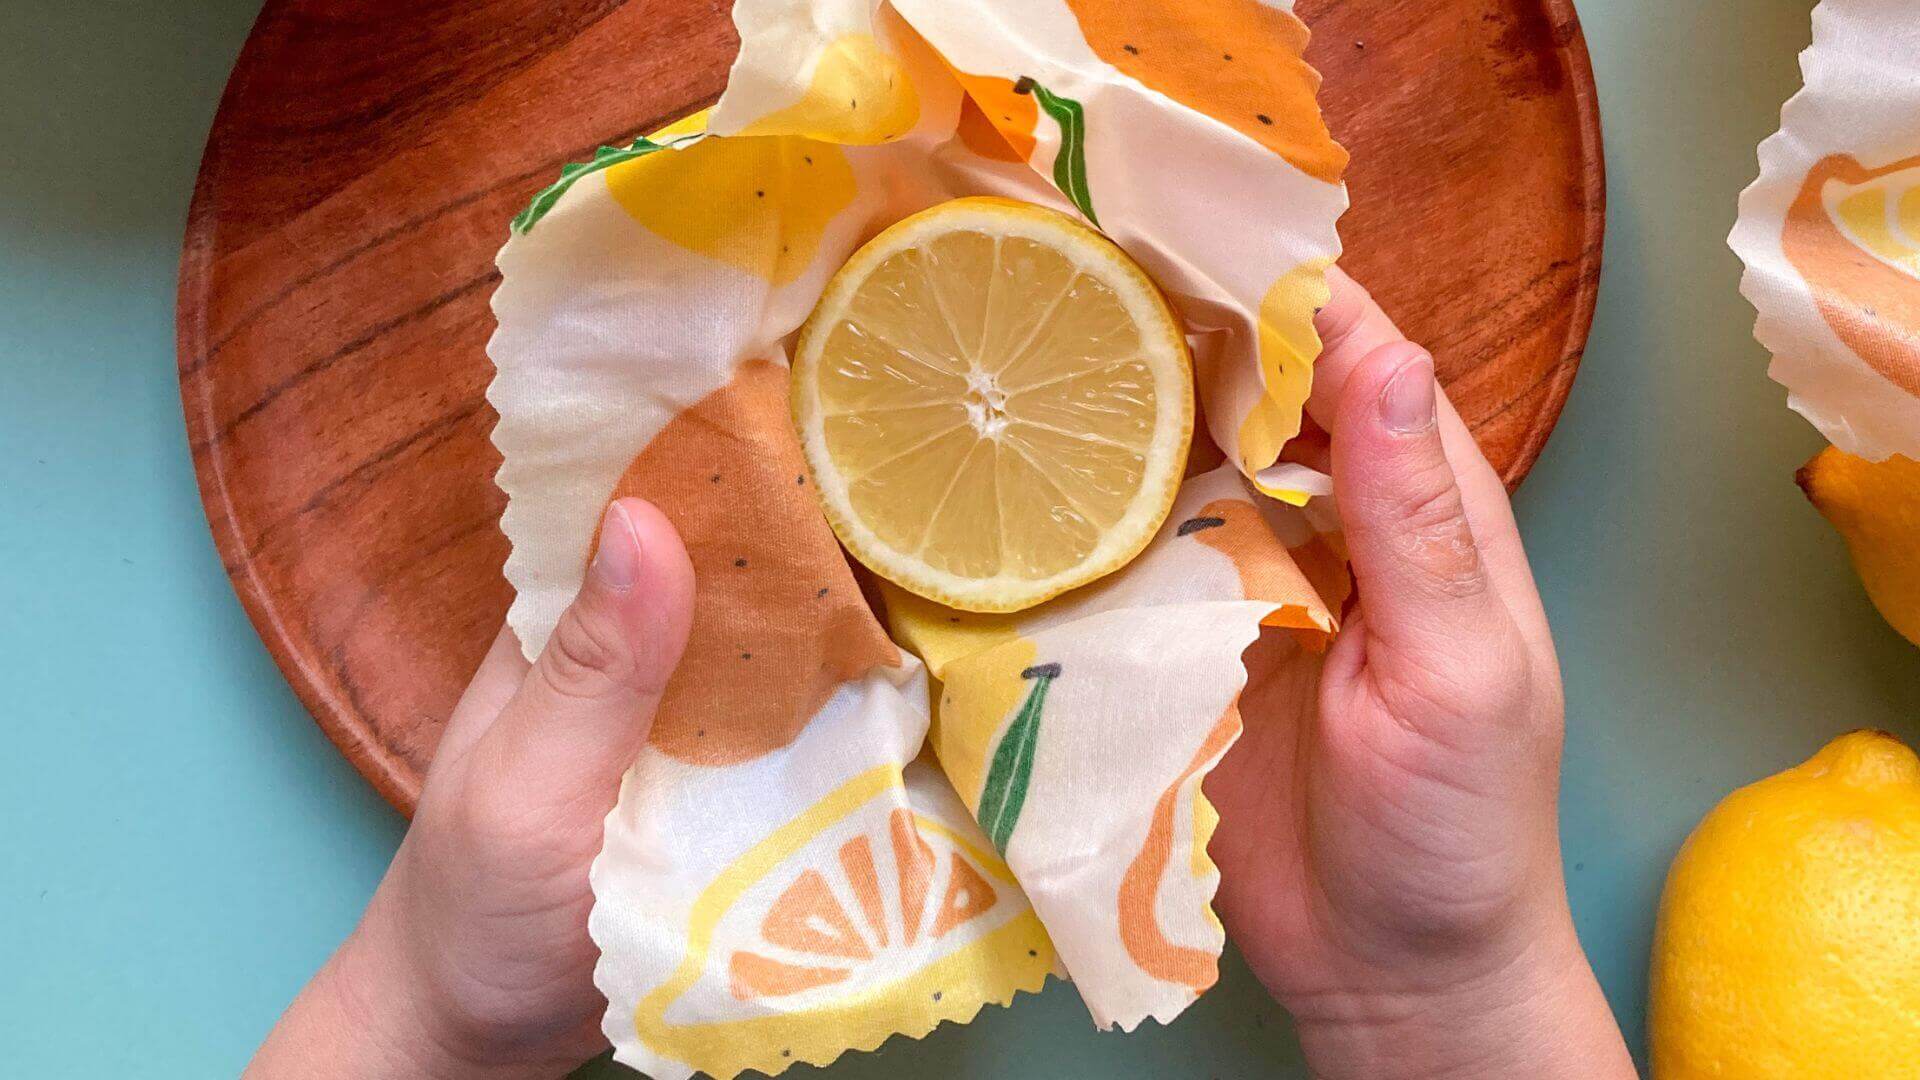 Collombatti Naturals Beeswax Wraps FAQ picture of someone wrapping a cut lemon in a beeswax wrap